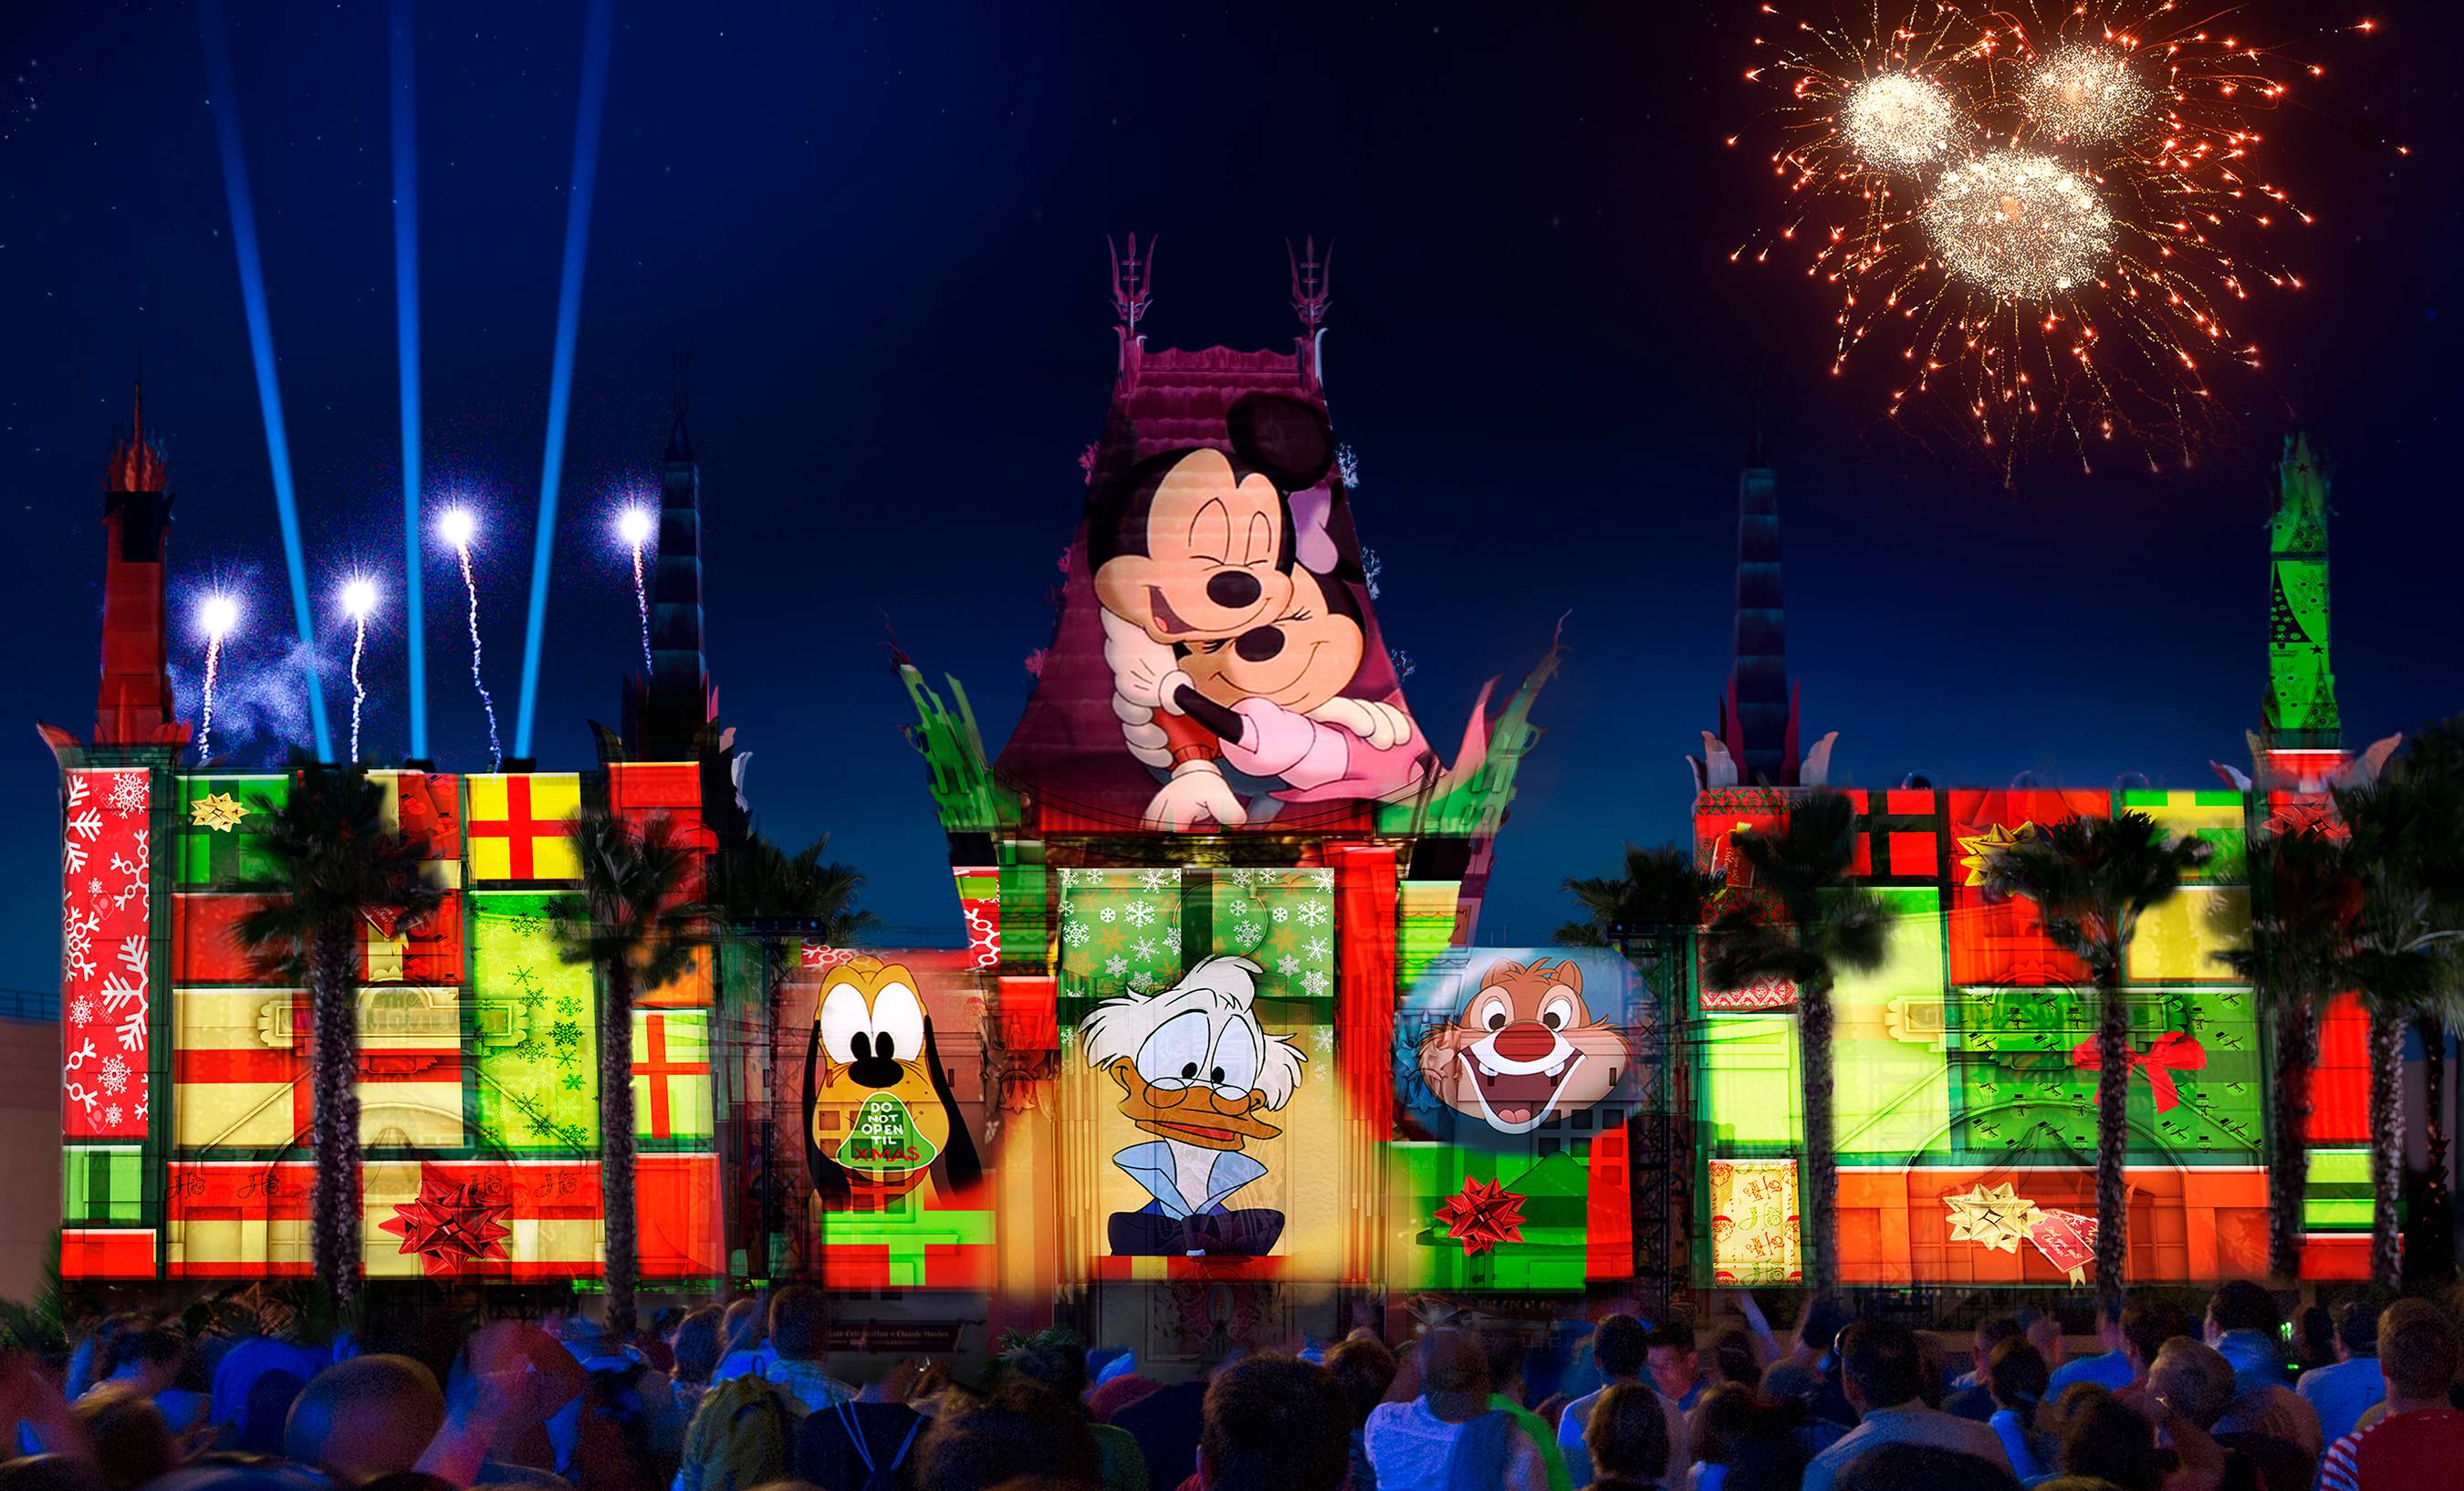 Disney's Hollywood Studios New Year's Eve entertainment line-up for 2013